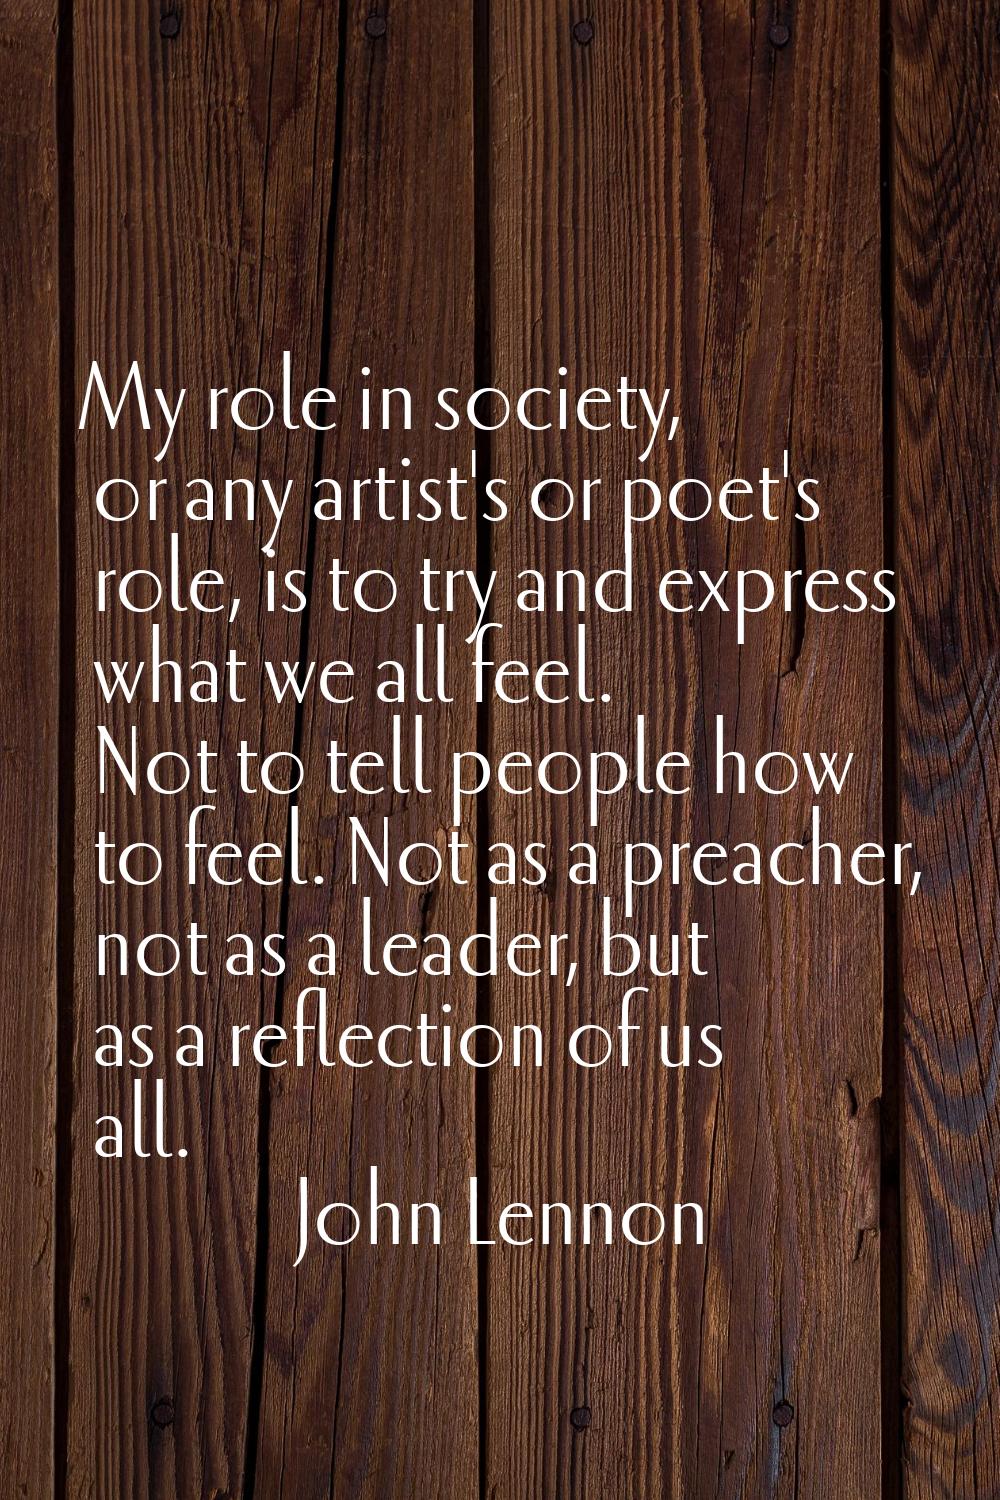 My role in society, or any artist's or poet's role, is to try and express what we all feel. Not to 